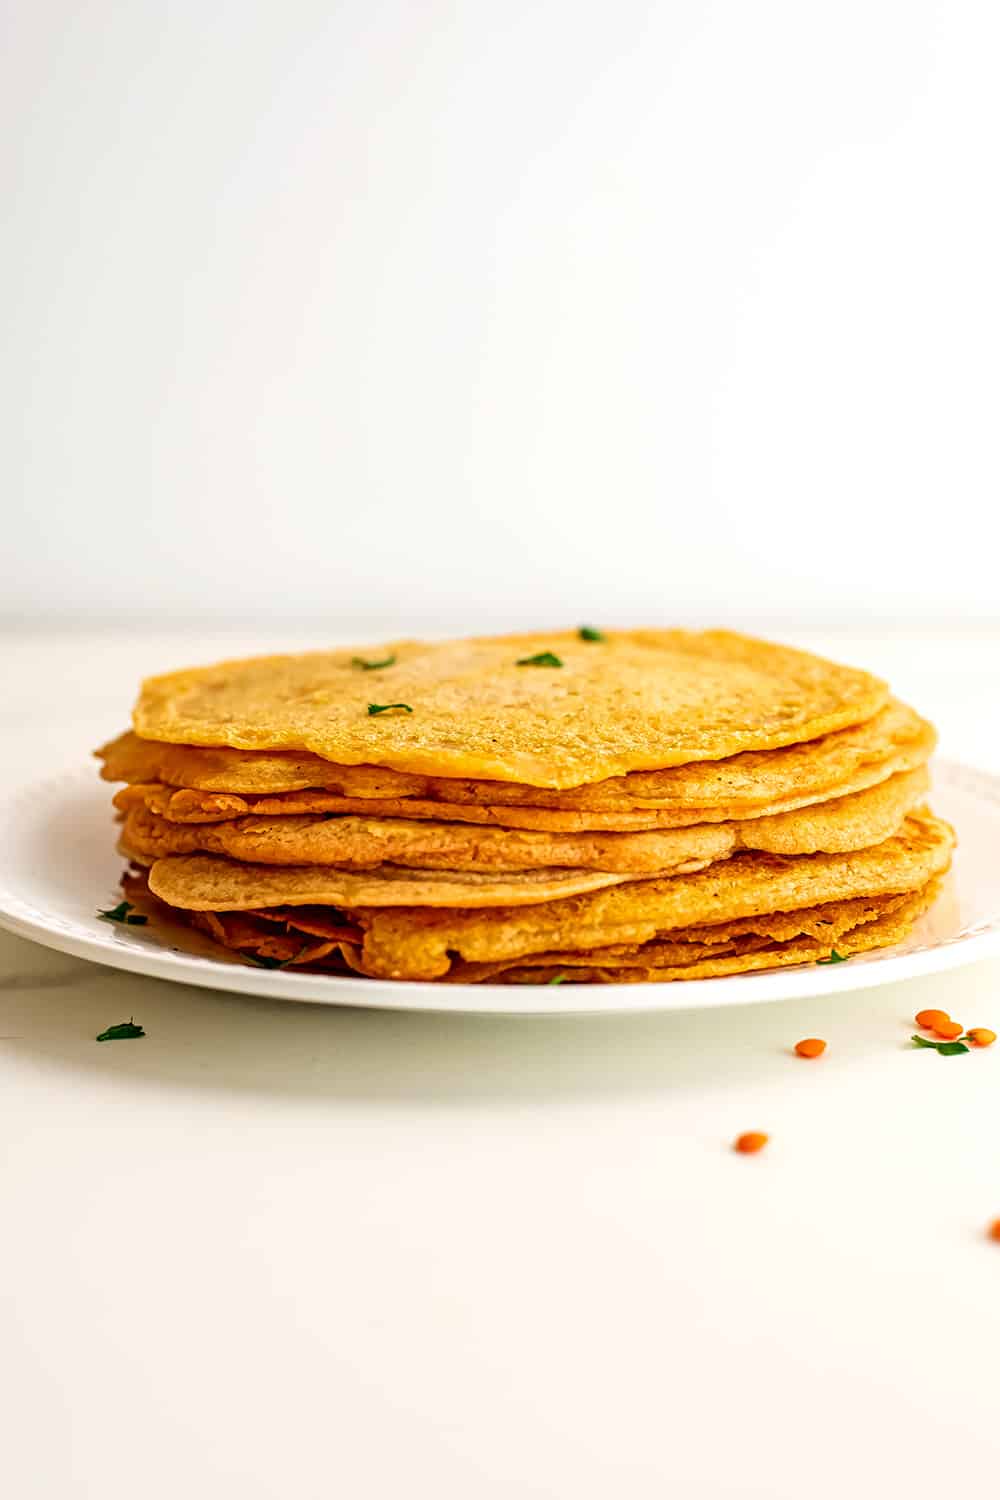 Lentil flatbreads stacked on top of eachother.